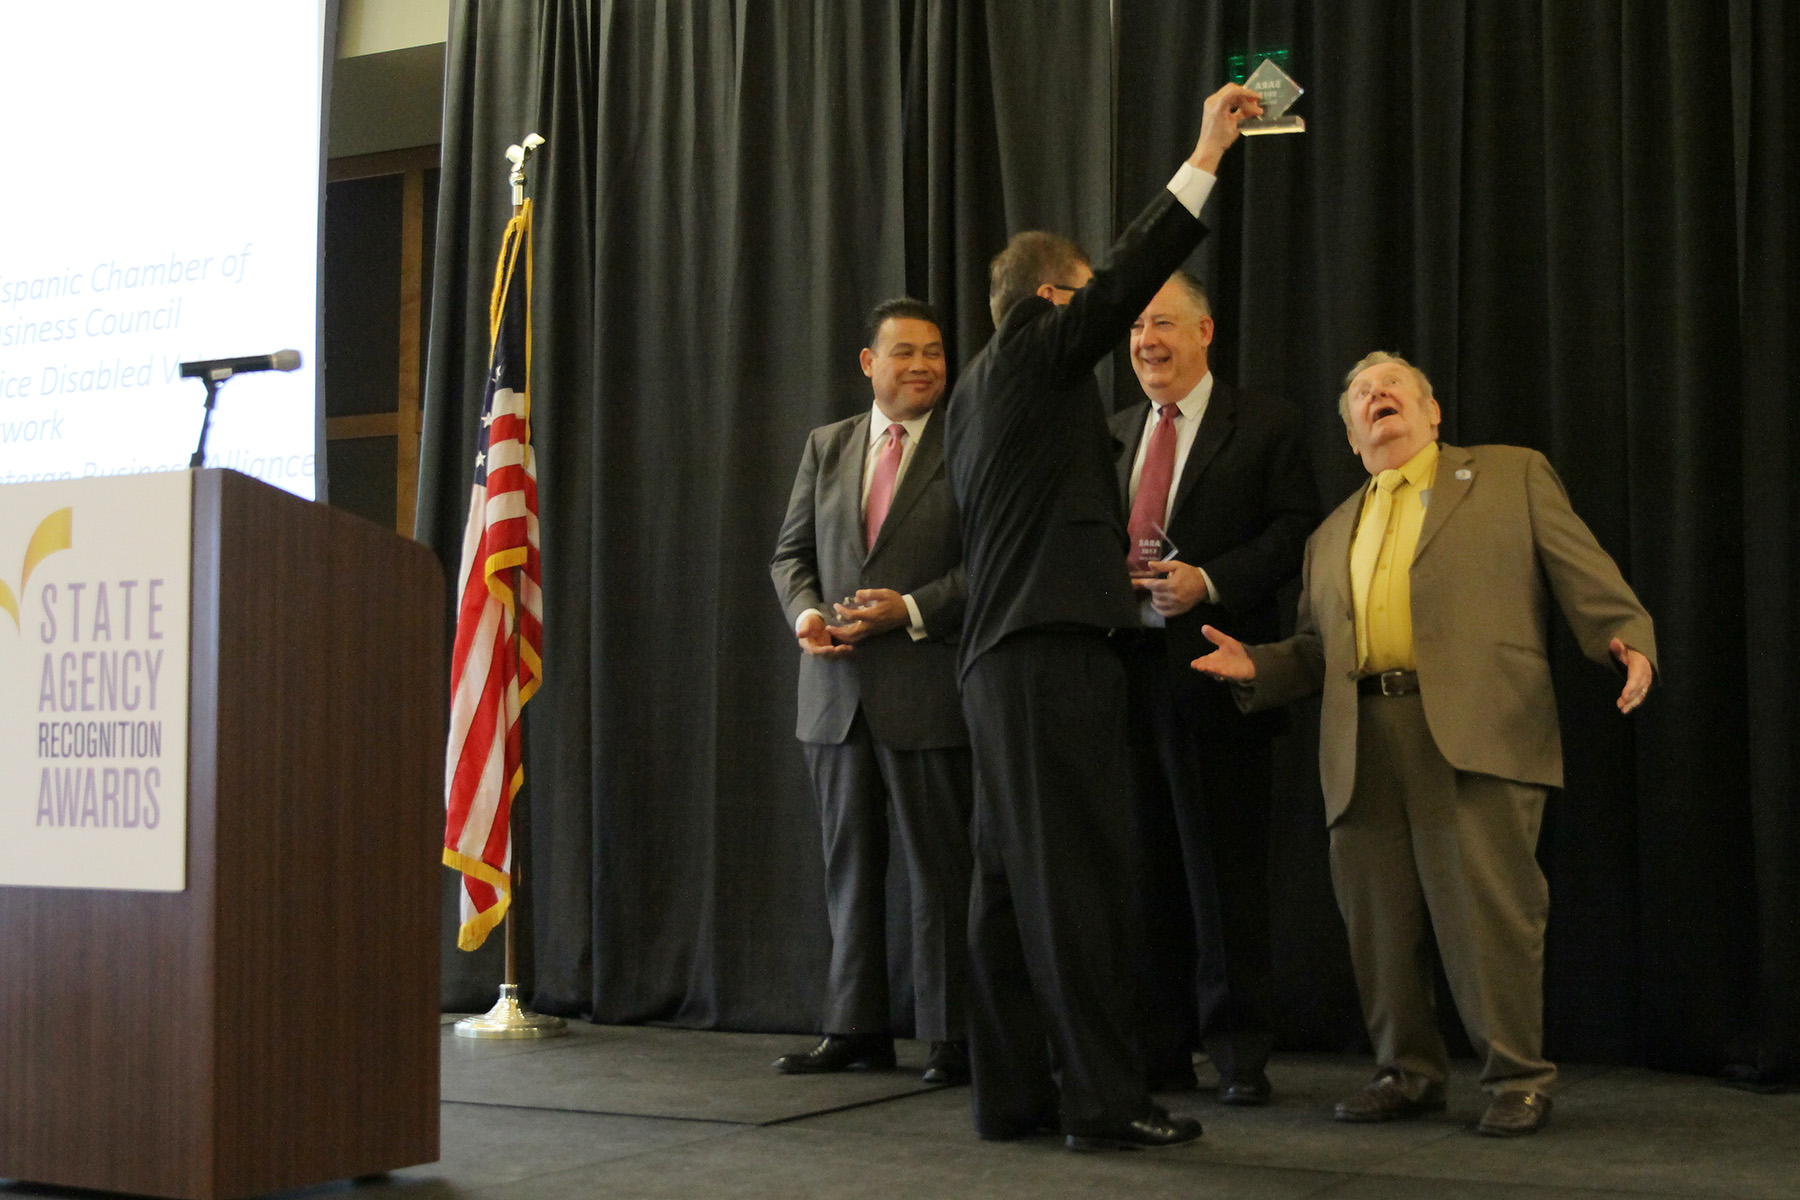 Recognition of the SARA judges. Pictured from left to right: Julian Canete, Marty Keller, and Bob Mulz